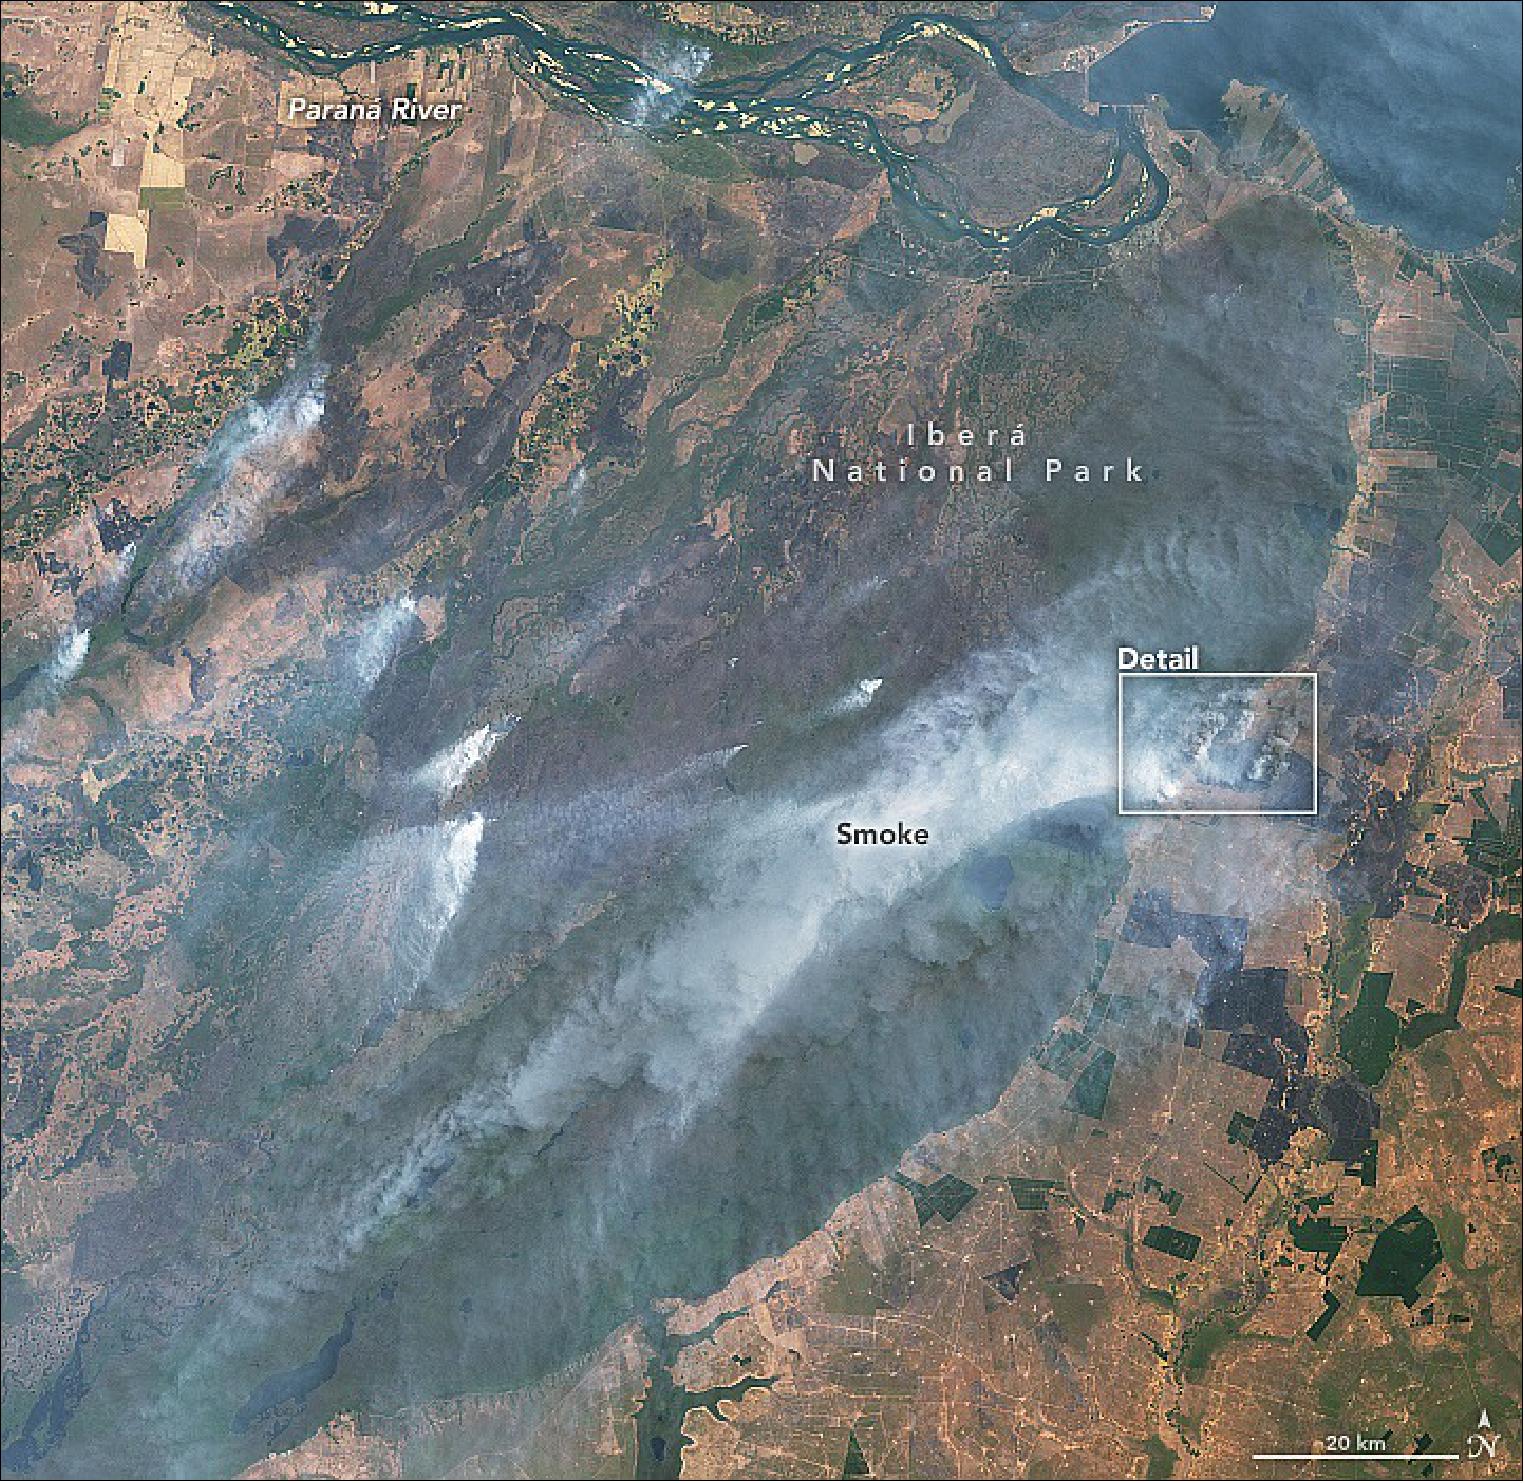 Figure 43: The images, acquired by the Operational Land Imager-2 (OLI-2) on Landsat-9 on February 16, 2022, show the scorched fields and heavy smoke from the multiple wildfires still burning near Iberá National Park (image credit: NASA Earth Observatory images by Lauren Dauphin, using Landsat data from the U.S. Geological Survey. Story by Sara E. Pratt)